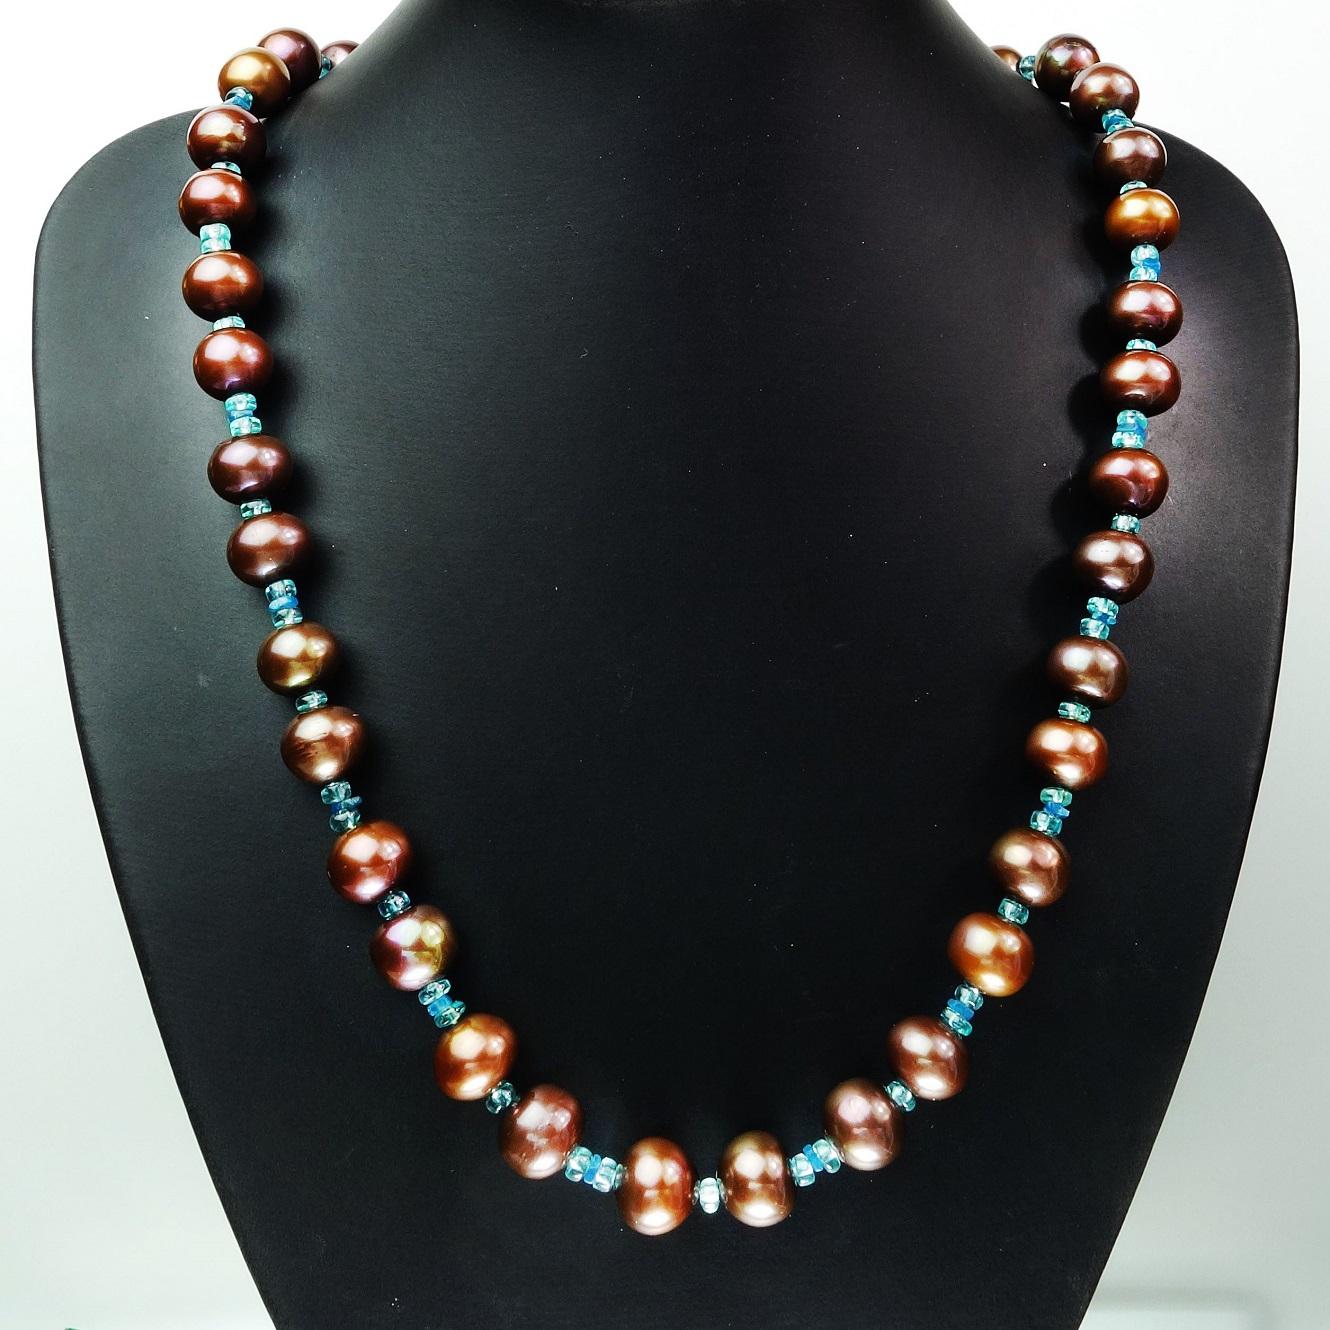 Artisan AJD Necklace Brown Pearls Accented with Sparkling Apatite  June Birthstone